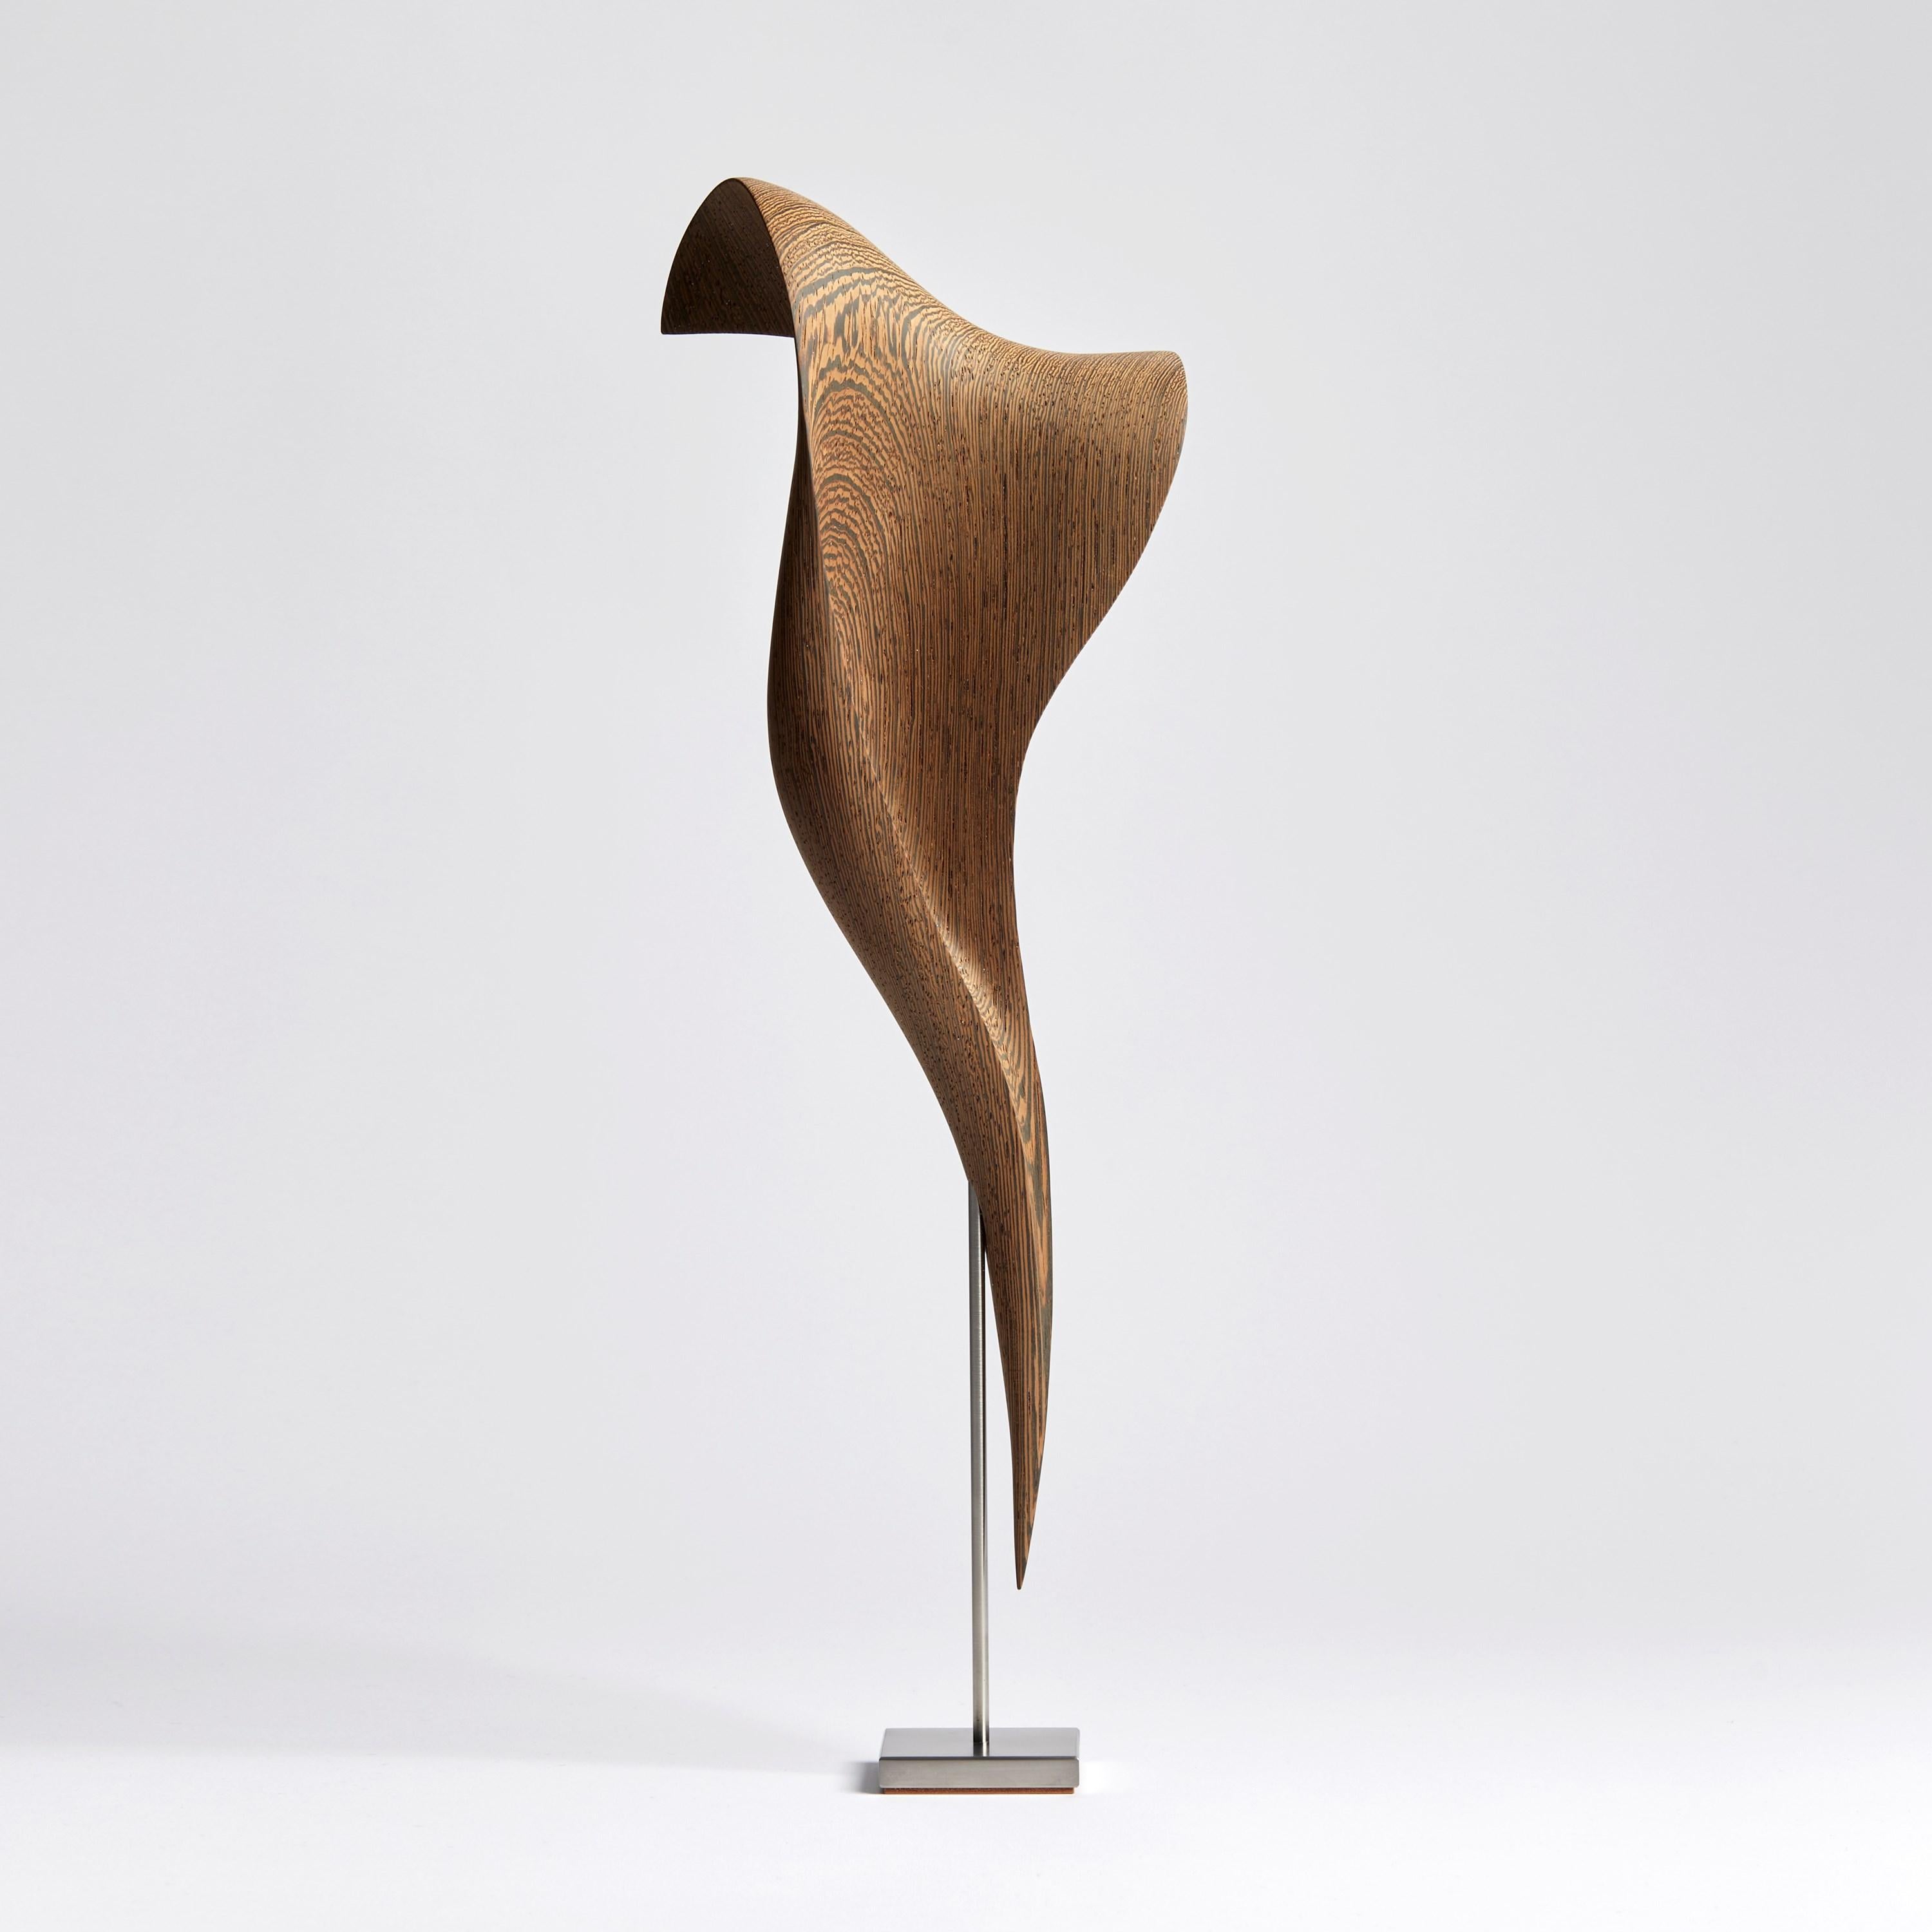 'Flow Petit No 3 ' is a unique artwork by the Danish artists, Egeværk. It is created from Wengé sourced from Africa - Congo and Cameroon - (wood, FSC* certified) with a stainless steel foot. Signed on the base.

The Flow Series created by Egeværk